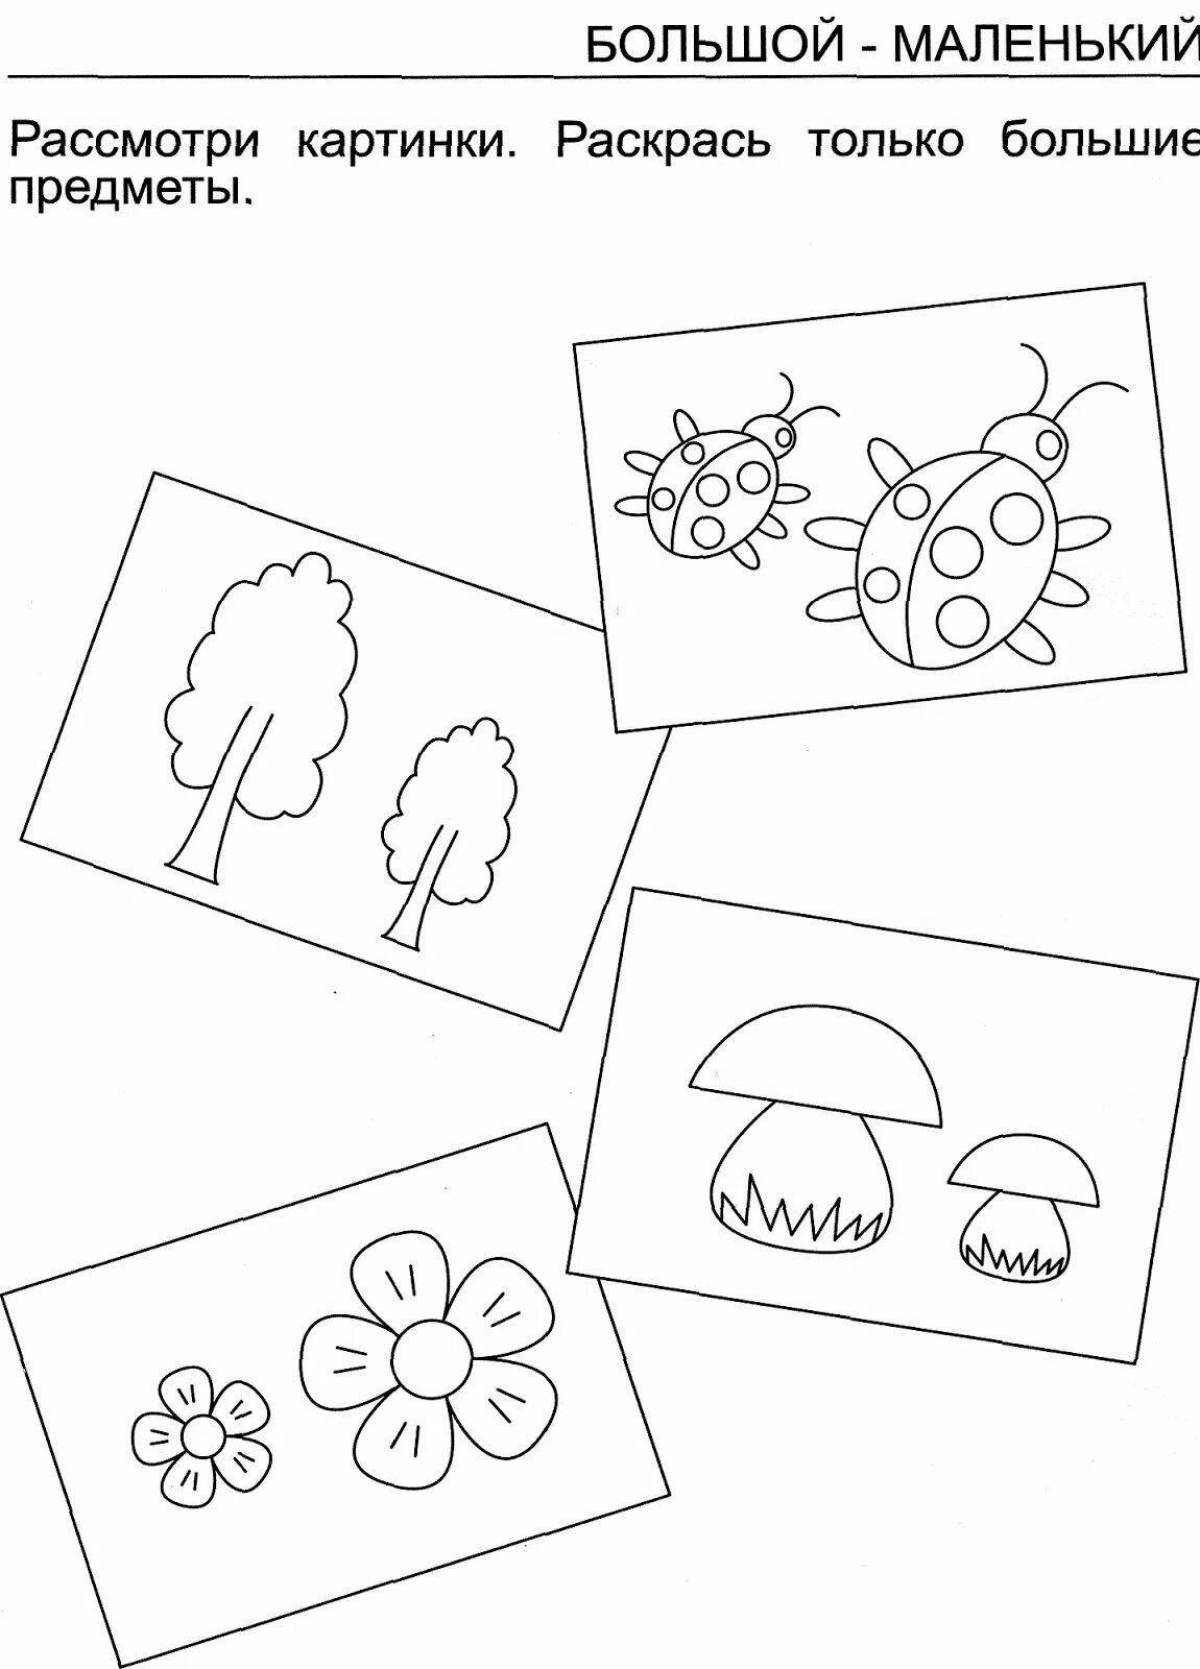 Fun big and small coloring book for 3-4 year olds